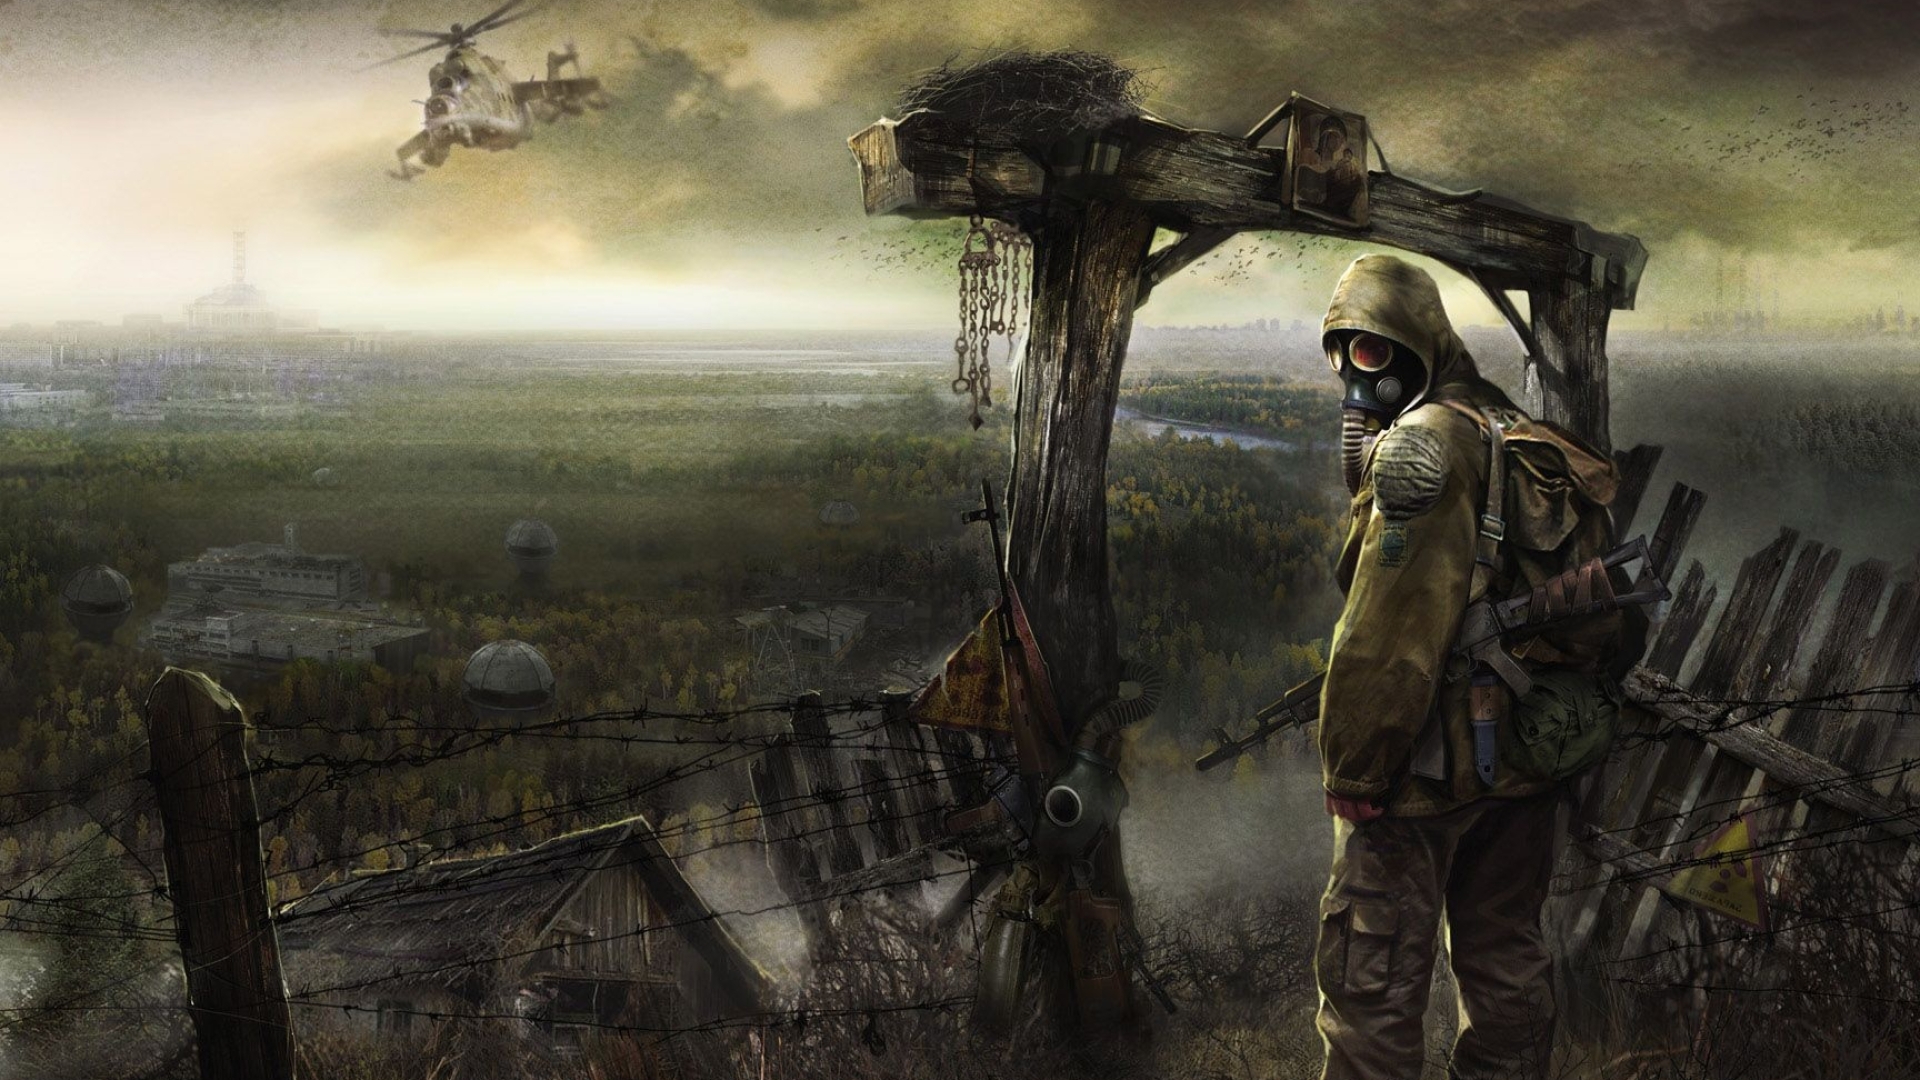 S.T.A.L.K.E.R. 2: STALKER: Clear Sky poster, Priboy's story fanmade modification. 1920x1080 Full HD Wallpaper.